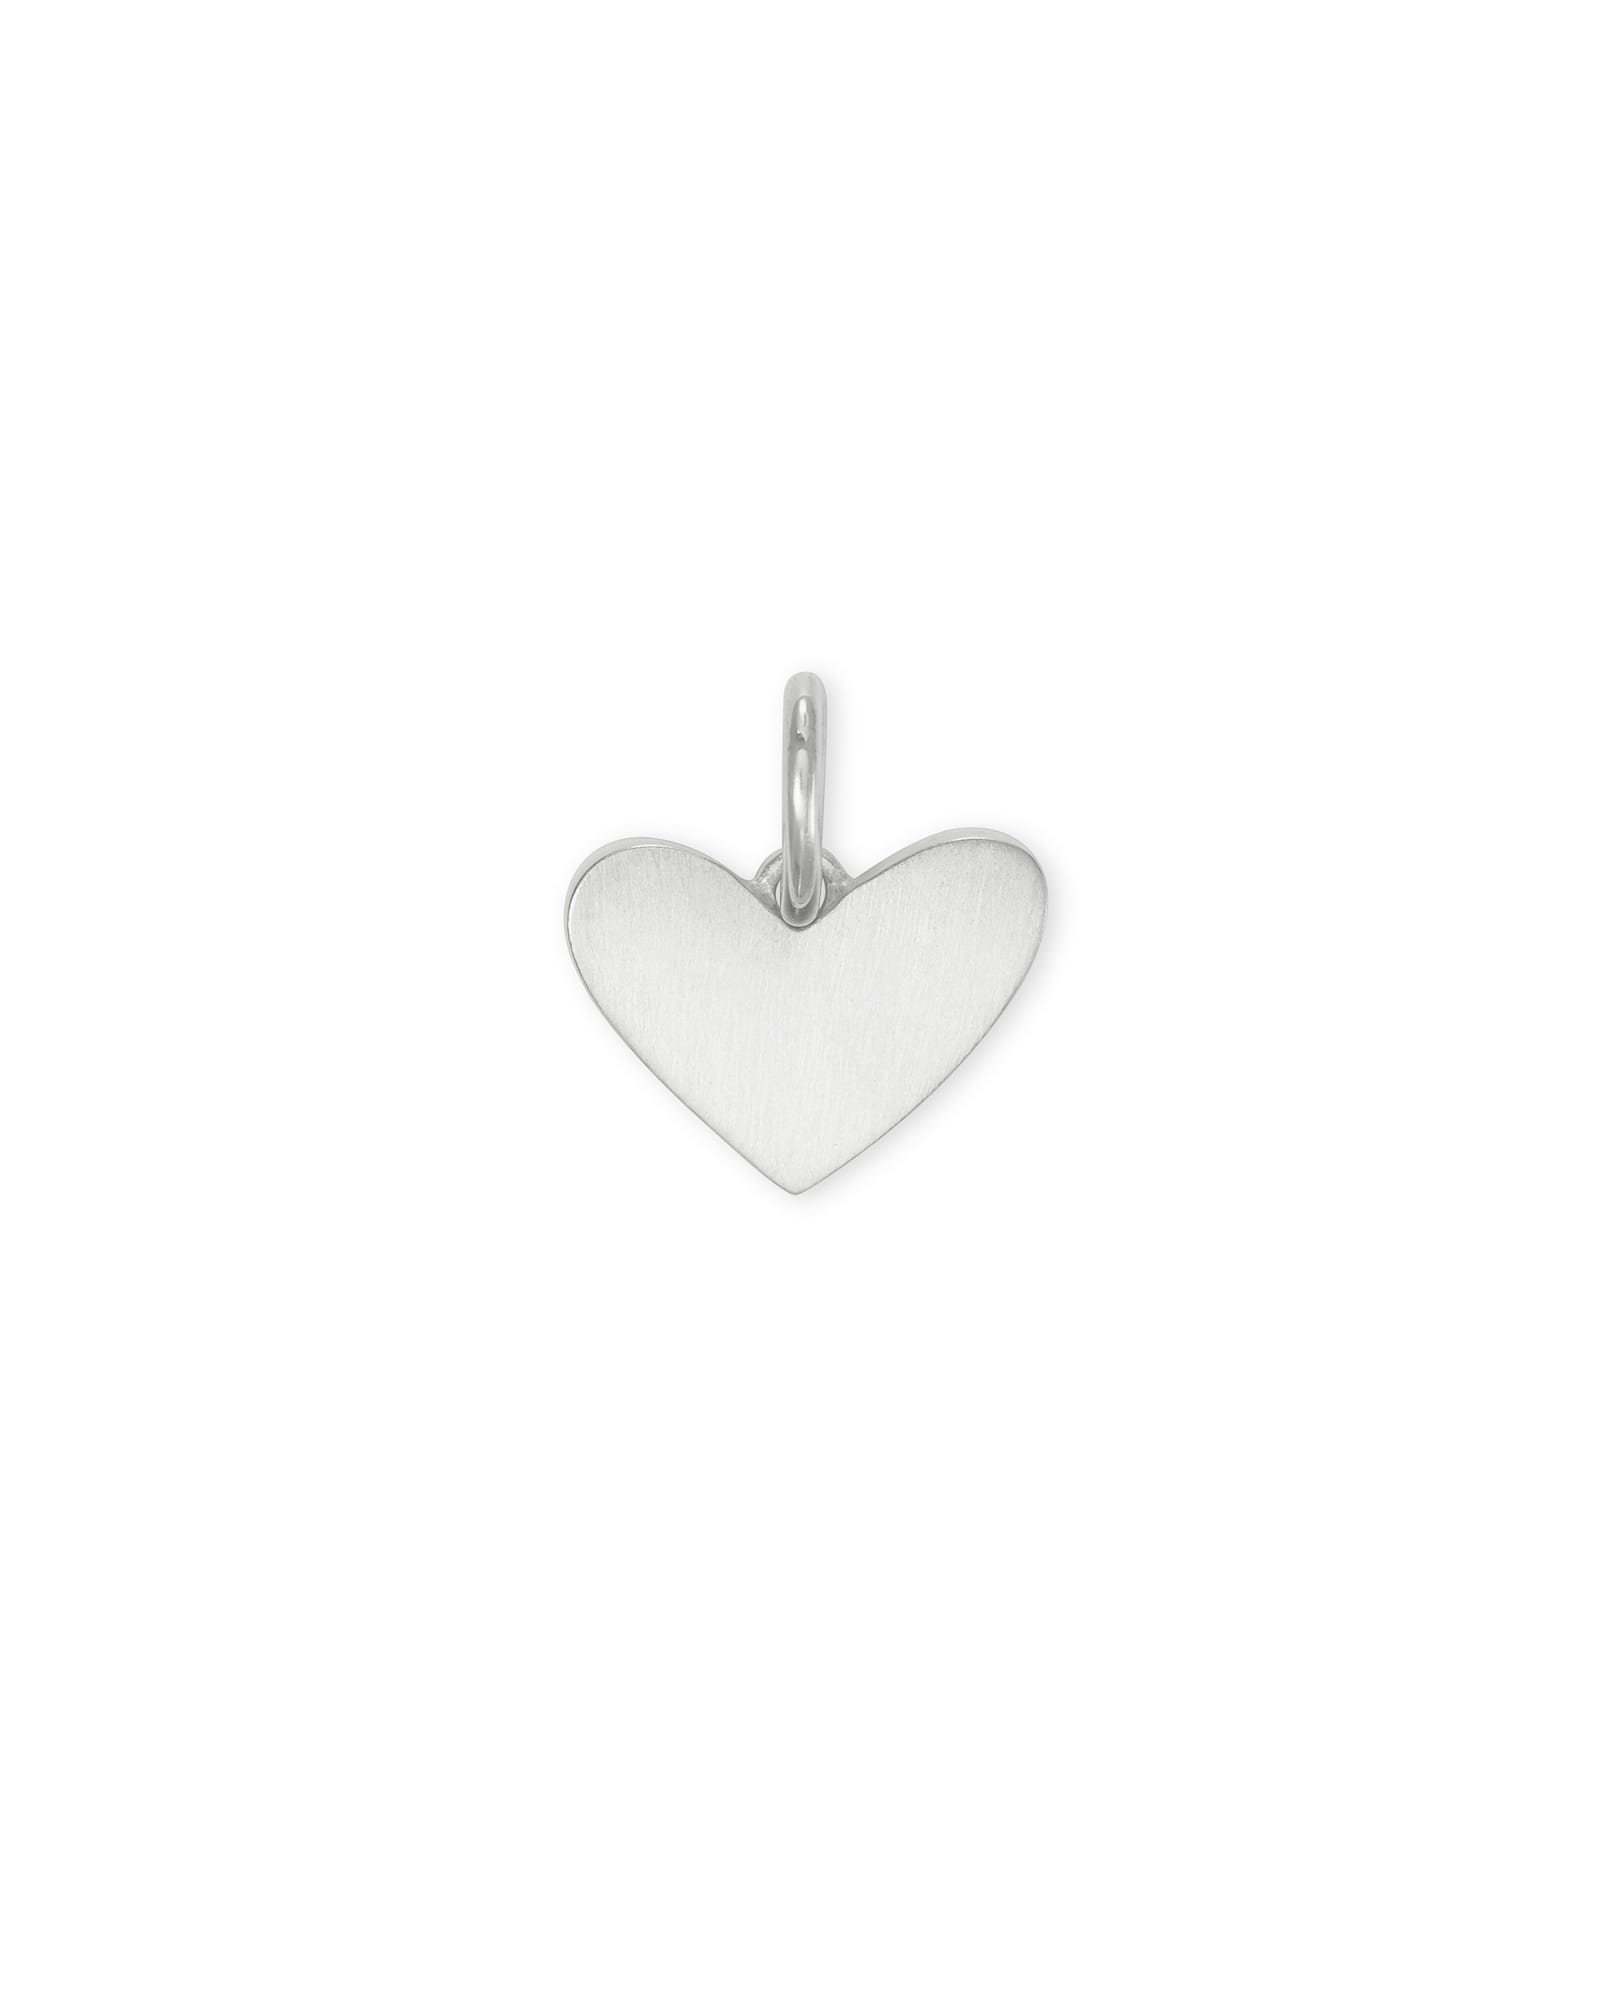 Ari Heart Charm in Sterling Silver